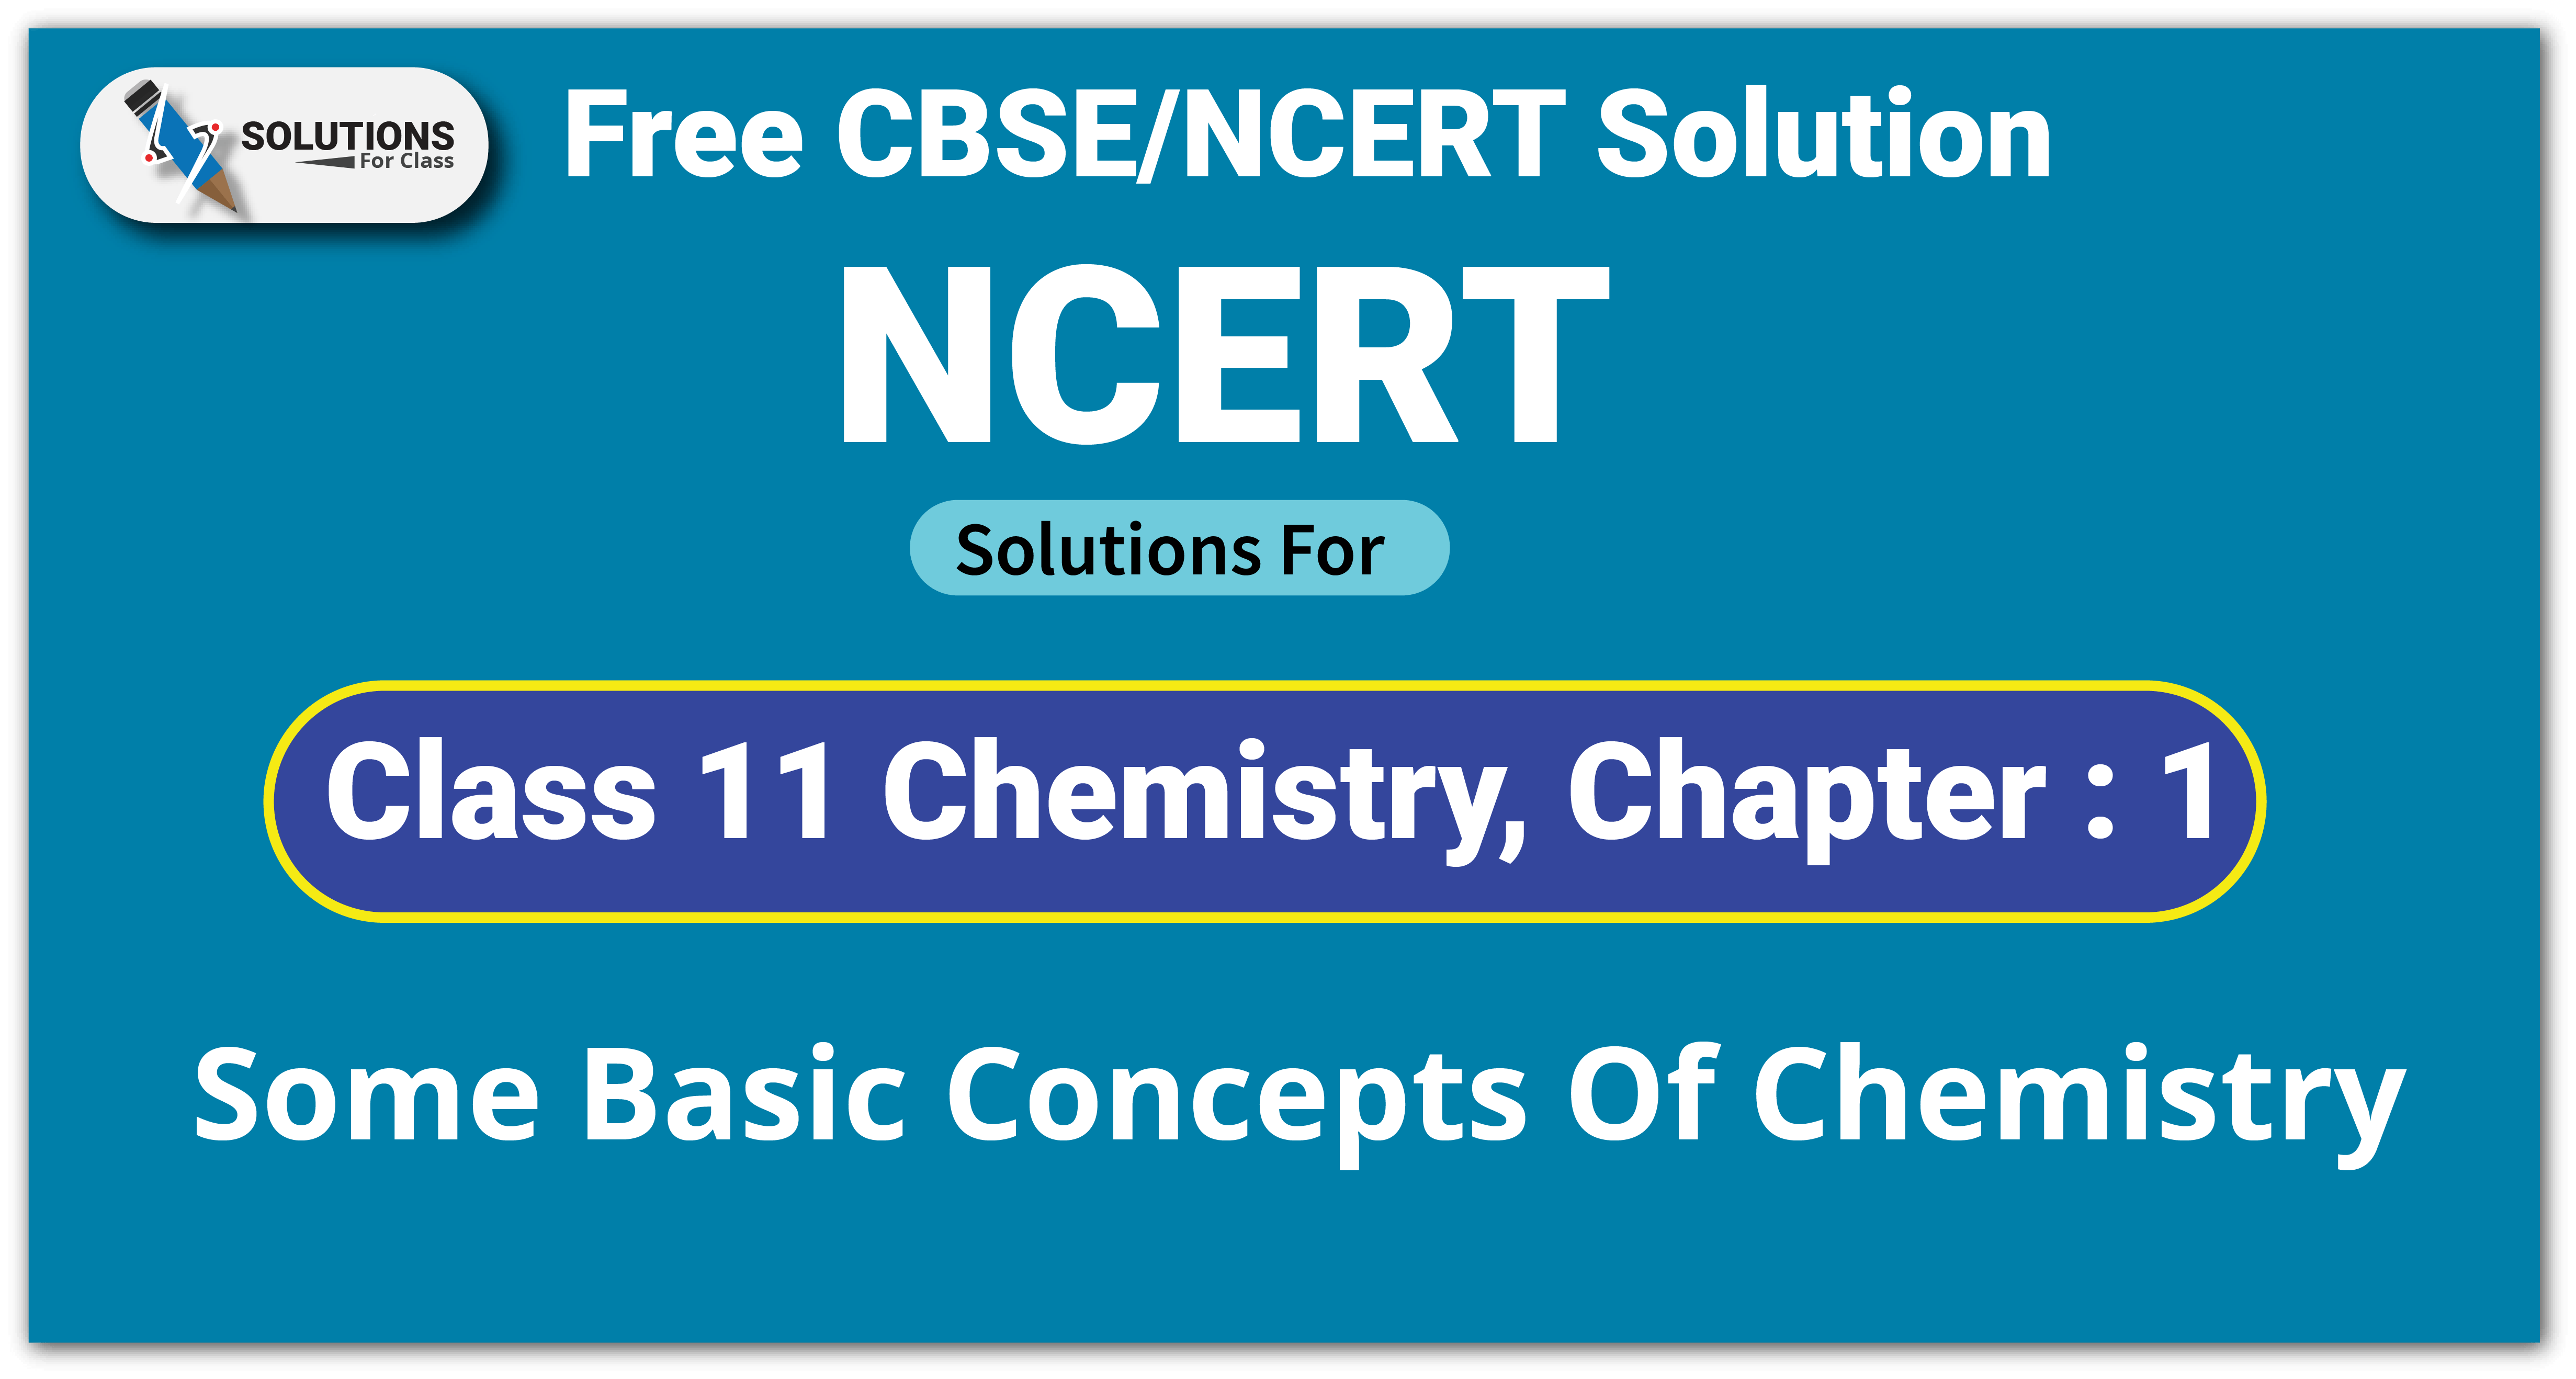 NCERT Solutions For Class 11 Chemistry Chapter 1